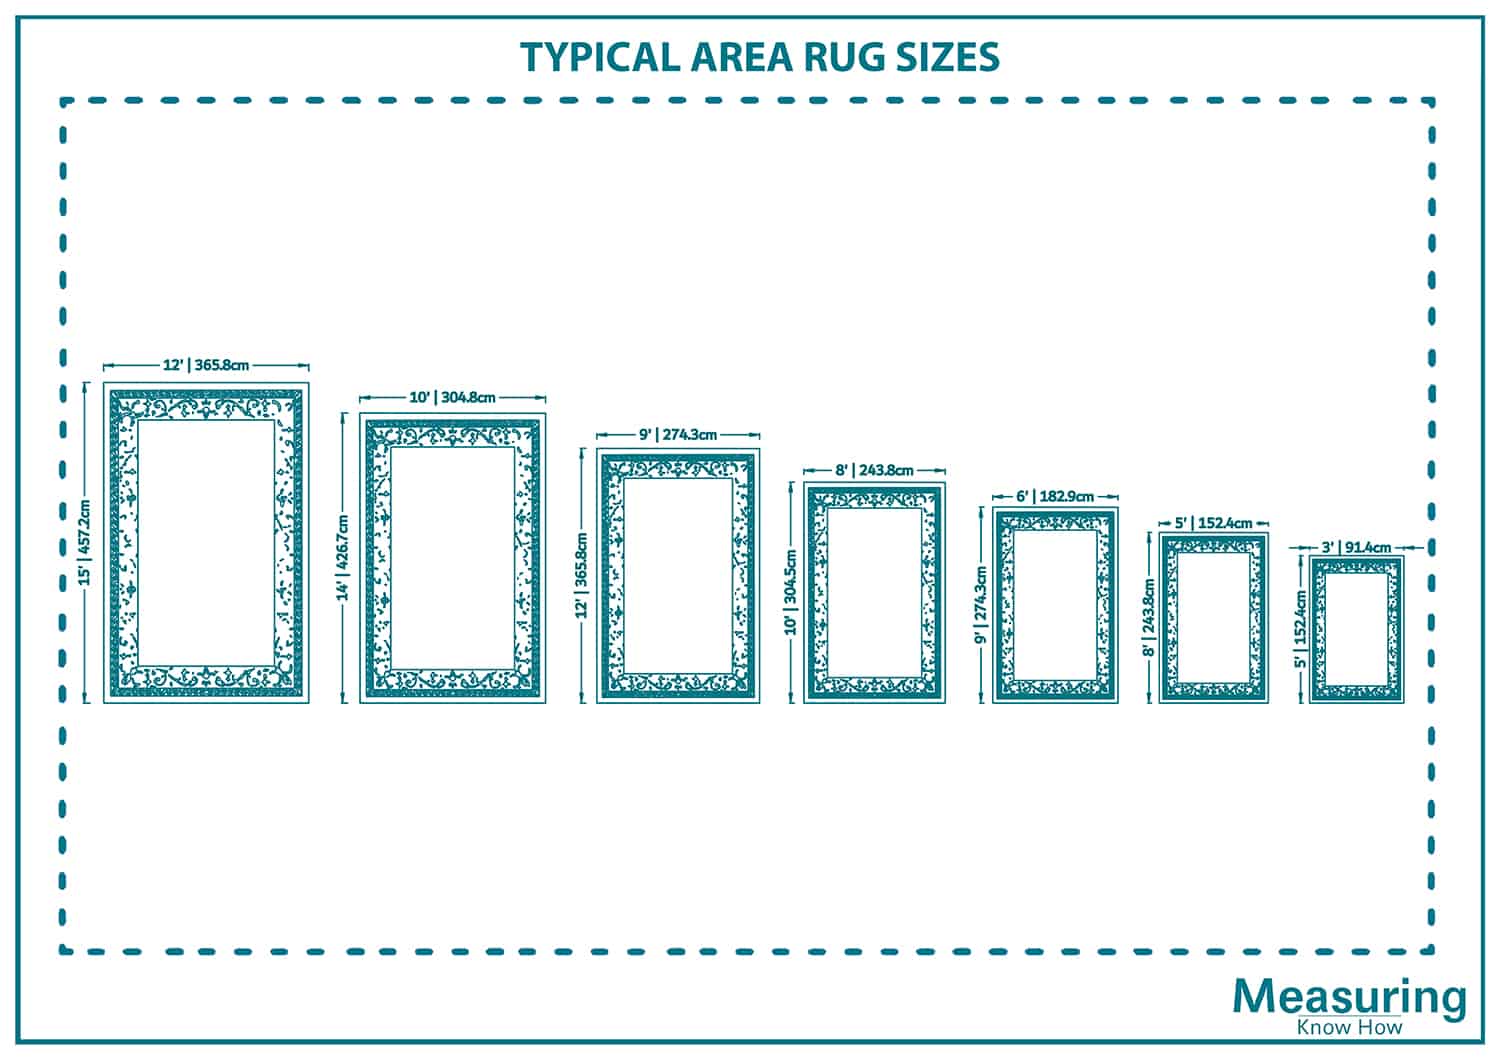 Typical area rug sizes